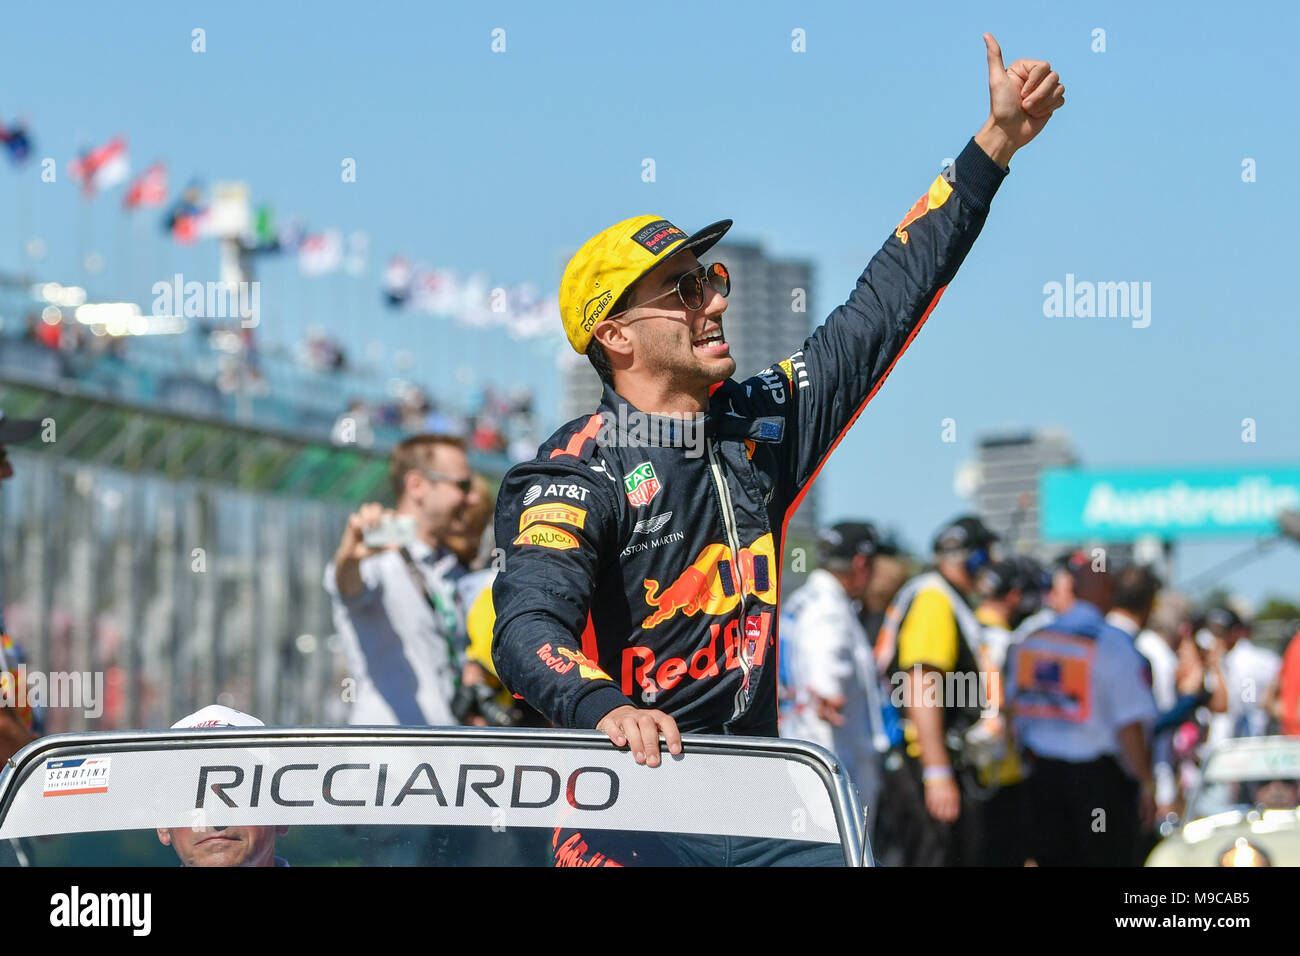 Albert Park, Melbourne, Australia. 25th Mar, 2018. Daniel Ricciardo (AUS) #3 from the Aston Martin Red Bull Racing team waves to the crowd during the drivers' parade at the 2018 Australian Formula One Grand Prix at Albert Park, Melbourne, Australia. Sydney Low/Cal Sport Media/Alamy Live News Stock Photo